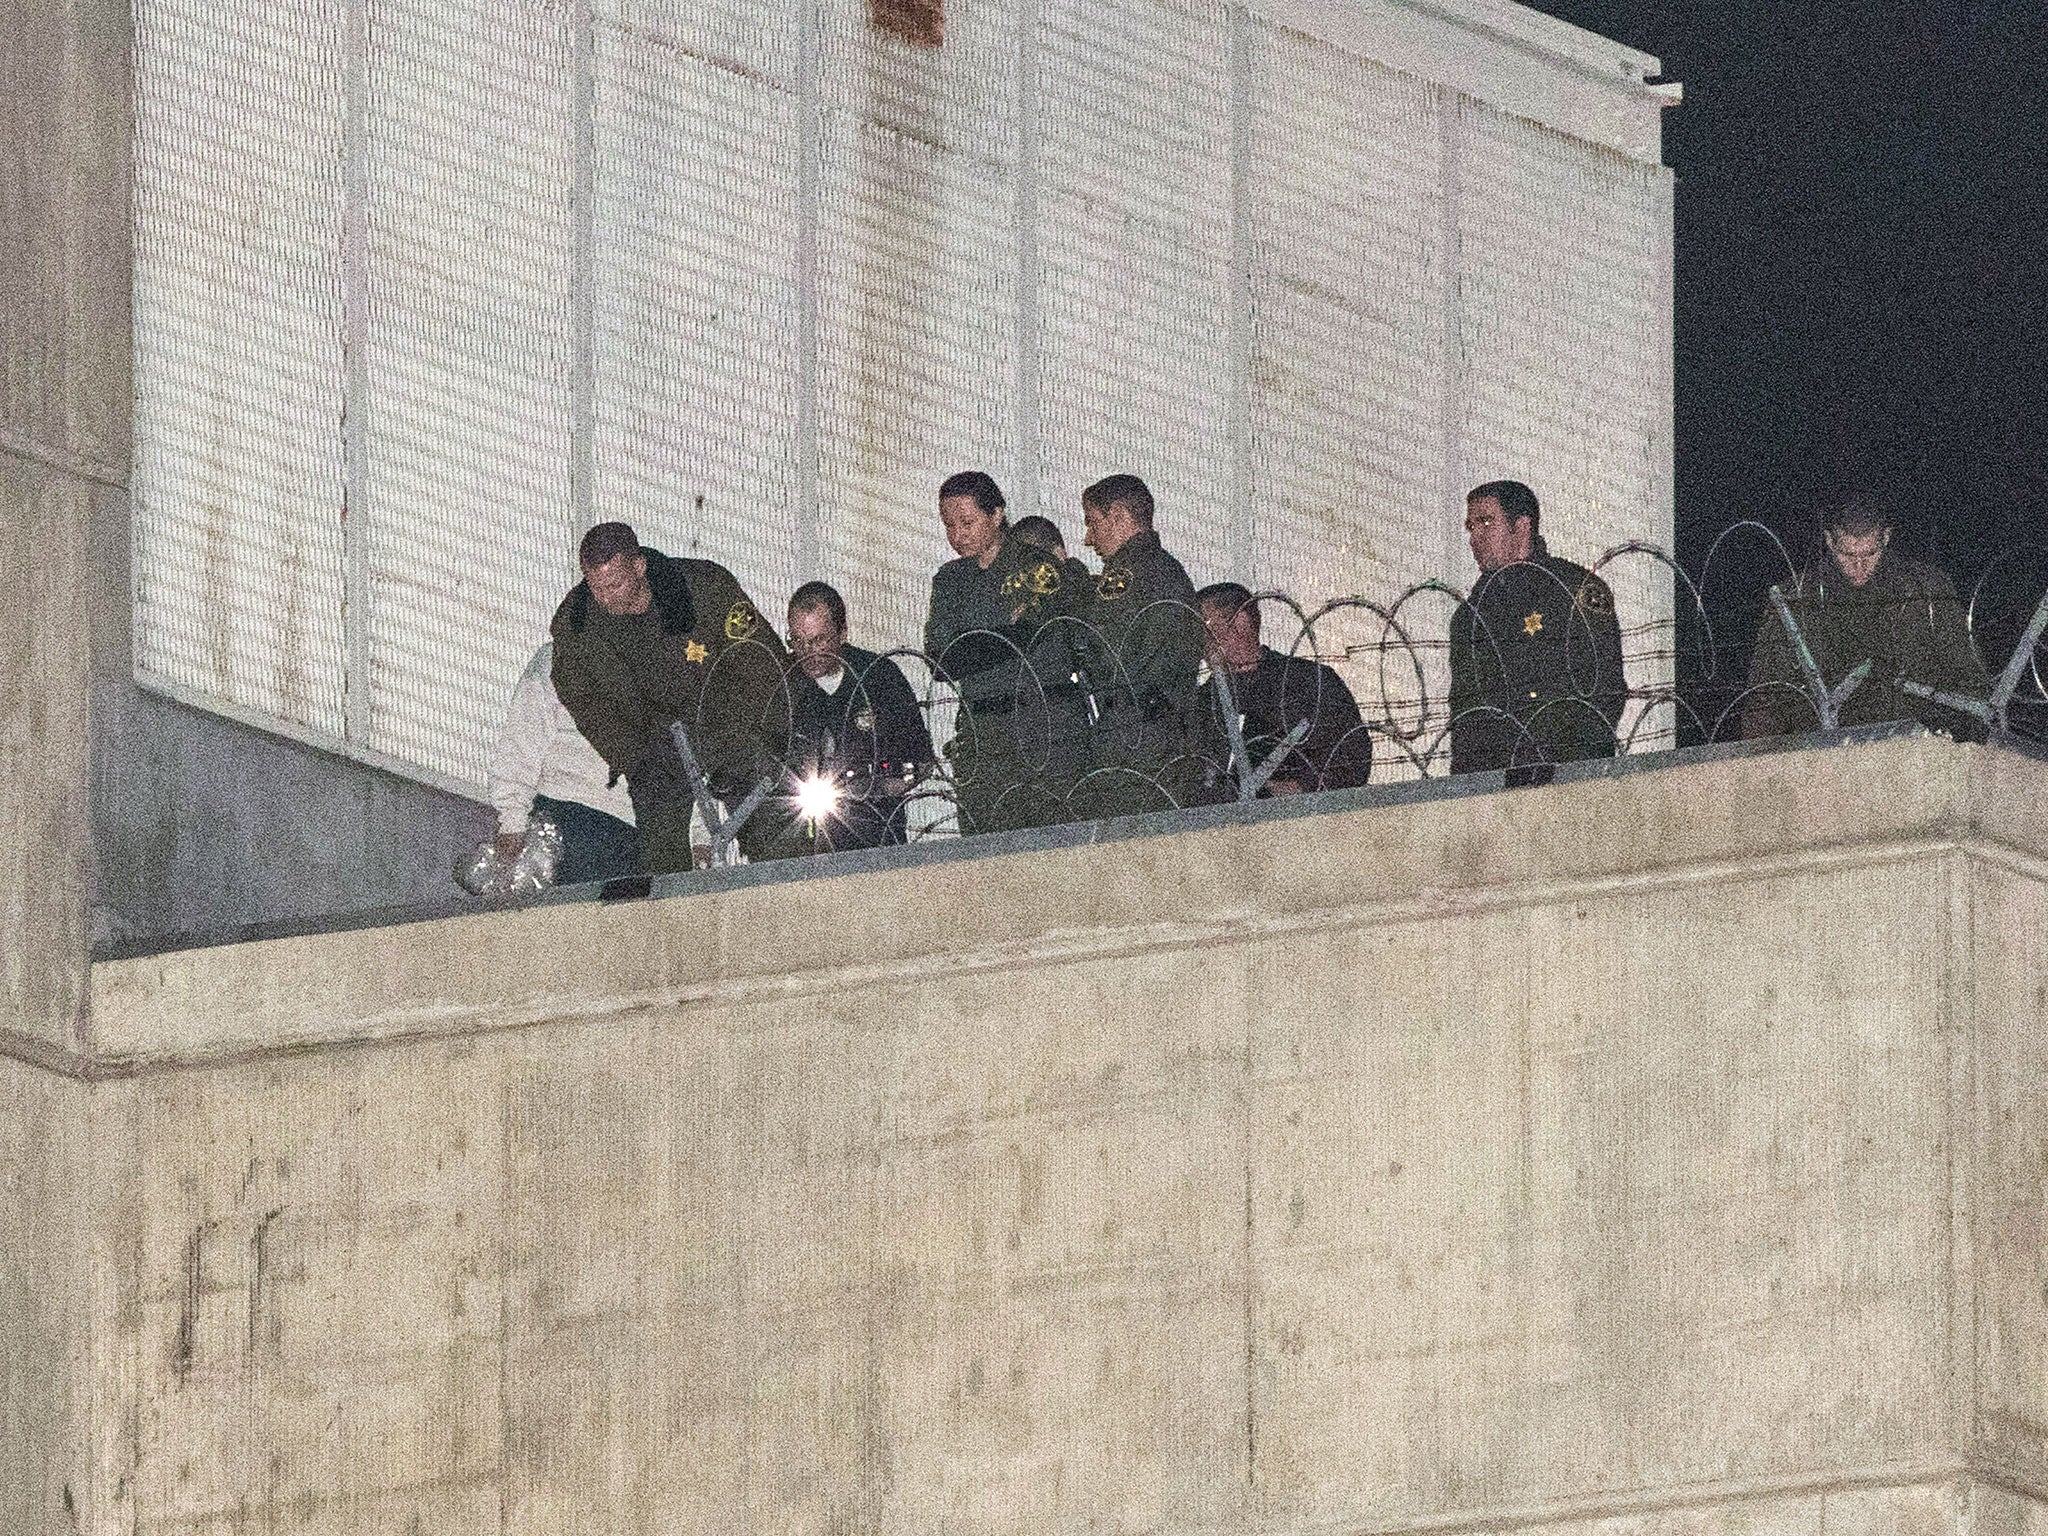 Orange County sheriff's deputies investigate early Saturday morning, 23 Jan, 2016, after three jail inmates charged with violent crimes escaped from Central Men's Jail in Santa Ana, California